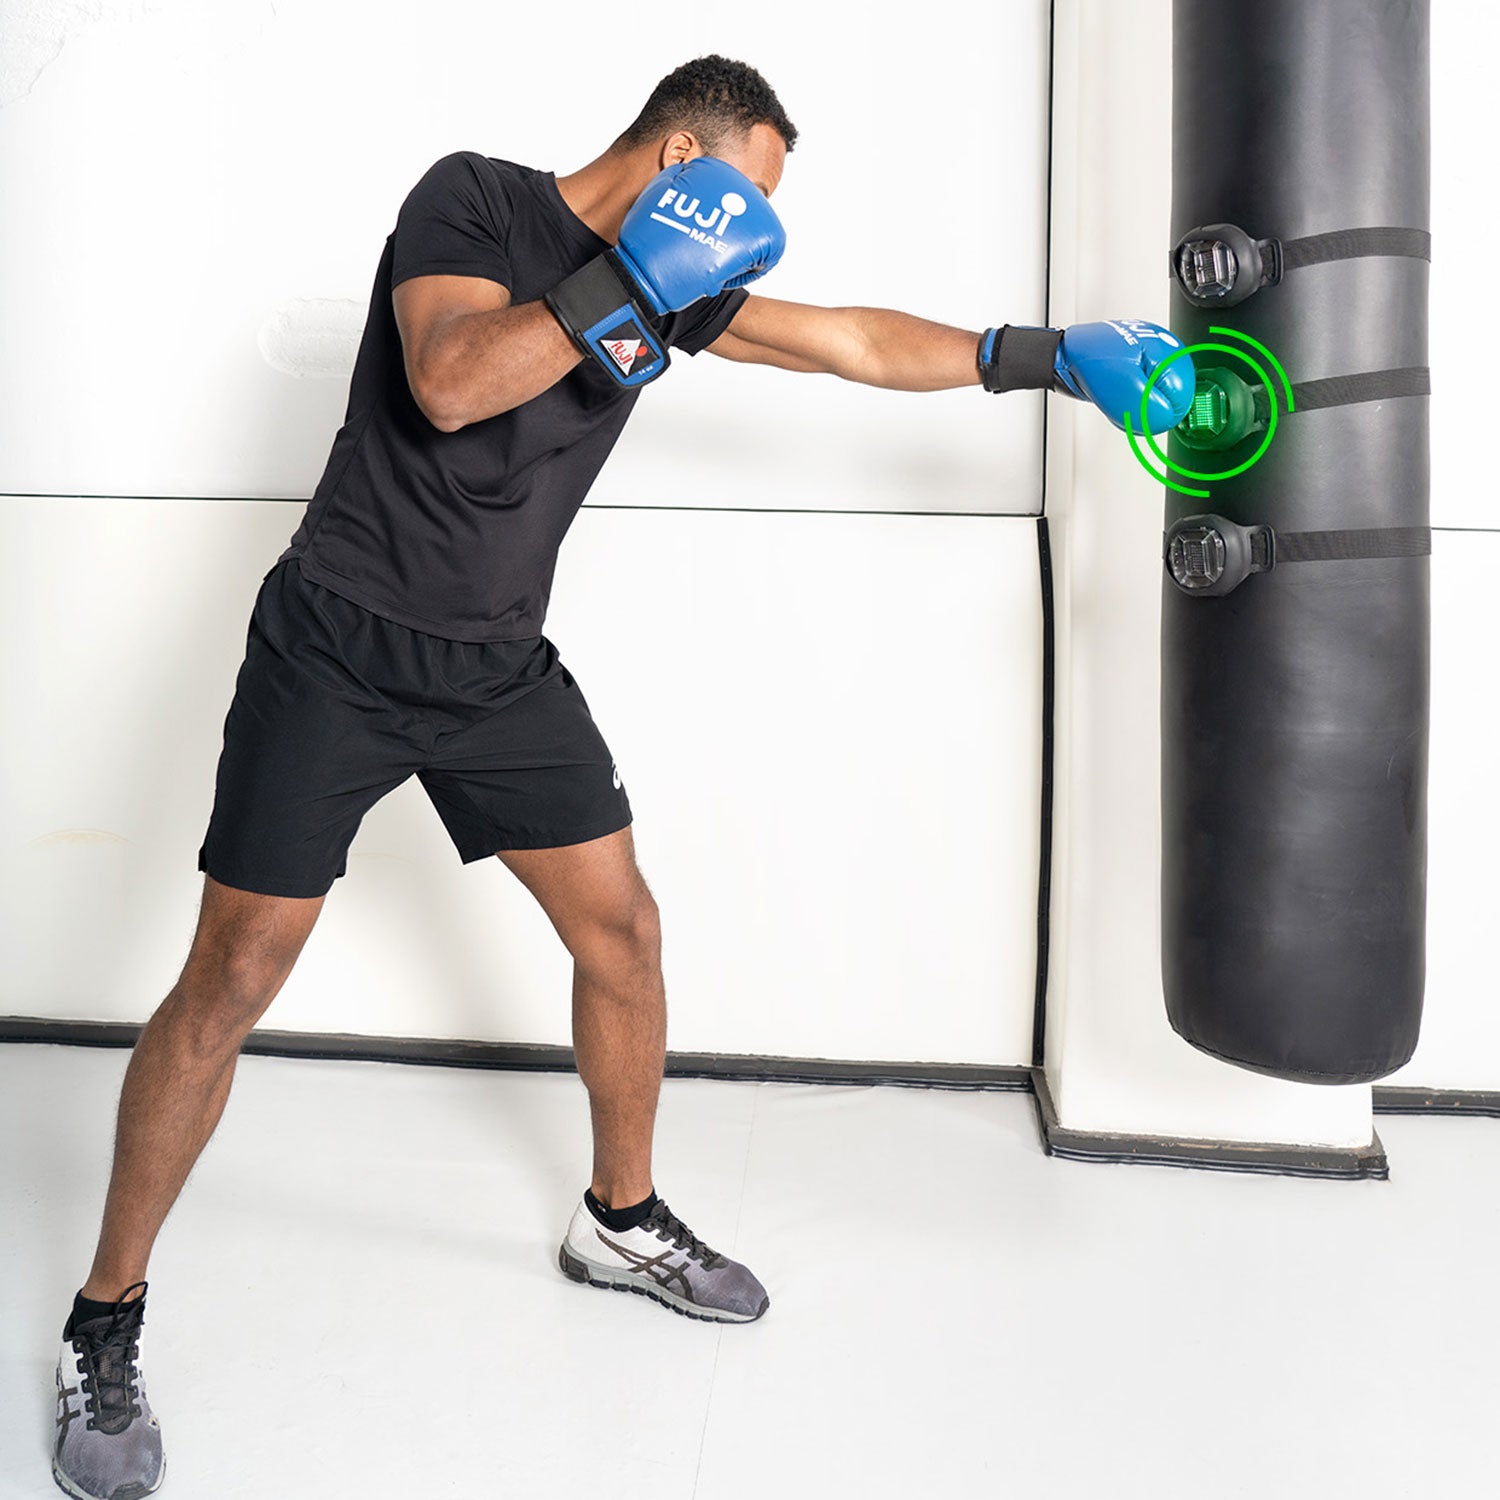 Boxing Reflex Ball Training Tips - Fight Practice